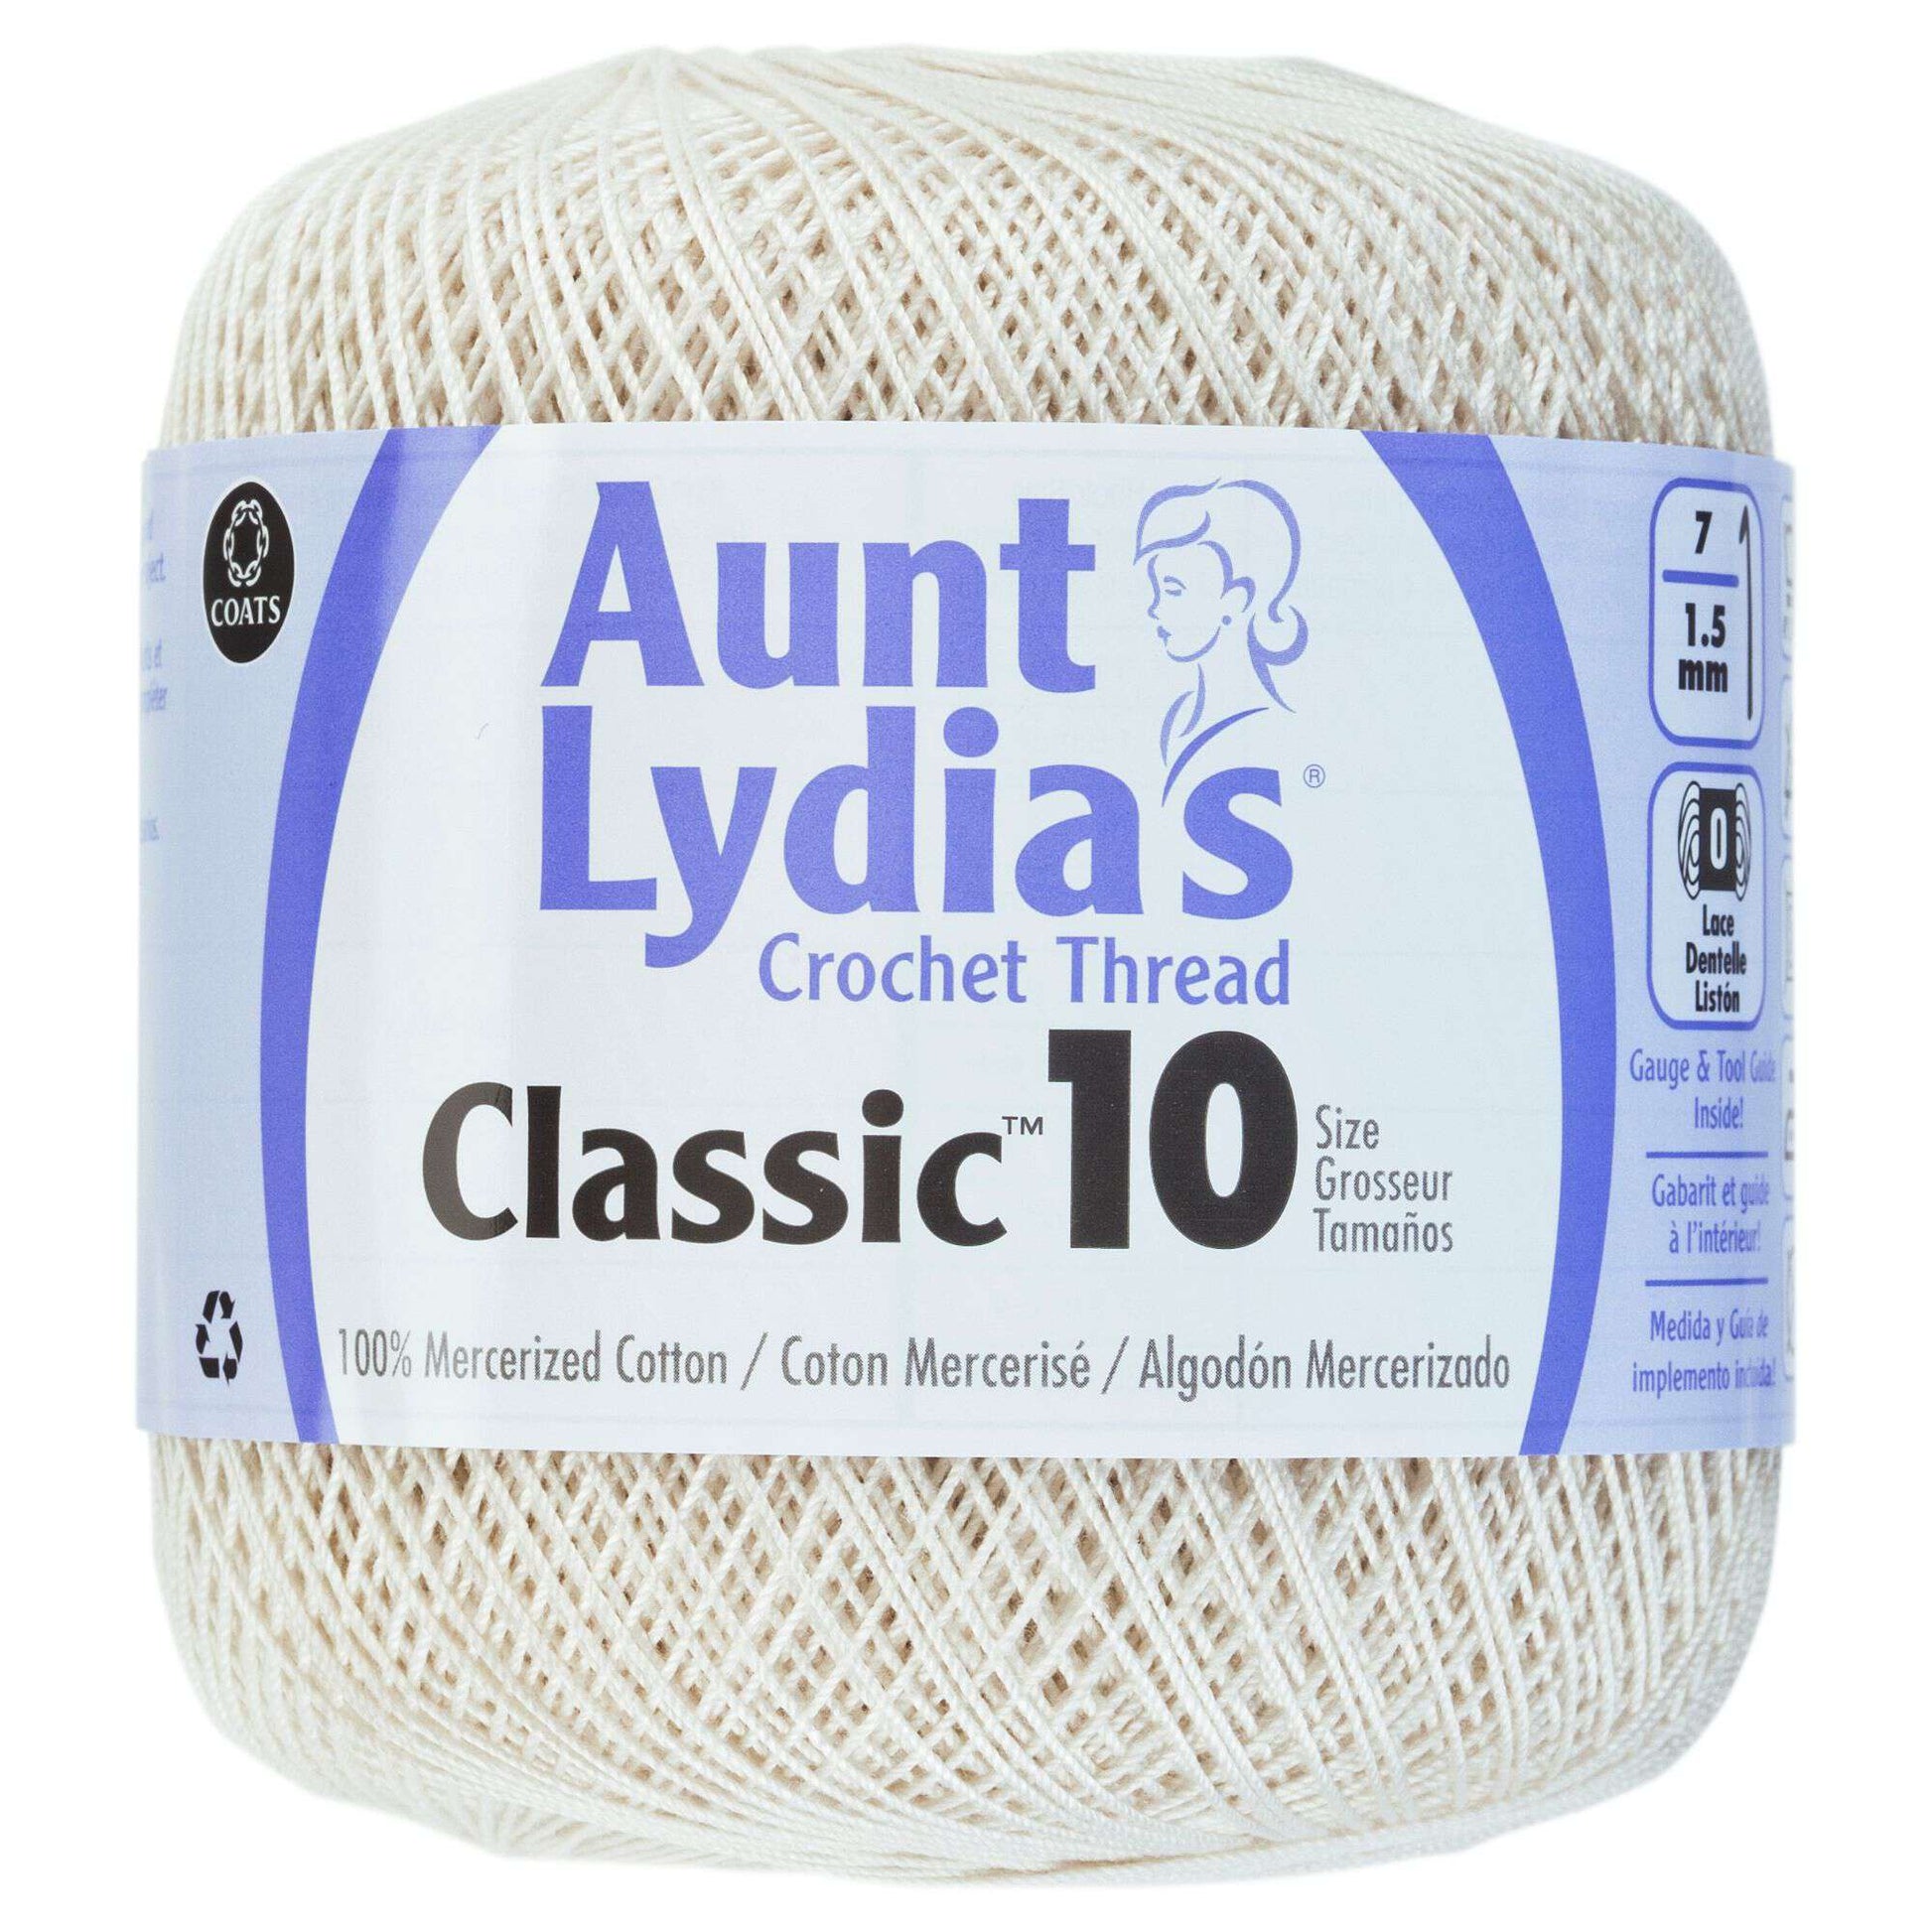 Aunt Lydia's Classic Crochet Thread Size 10 - Clearance shades Antique White